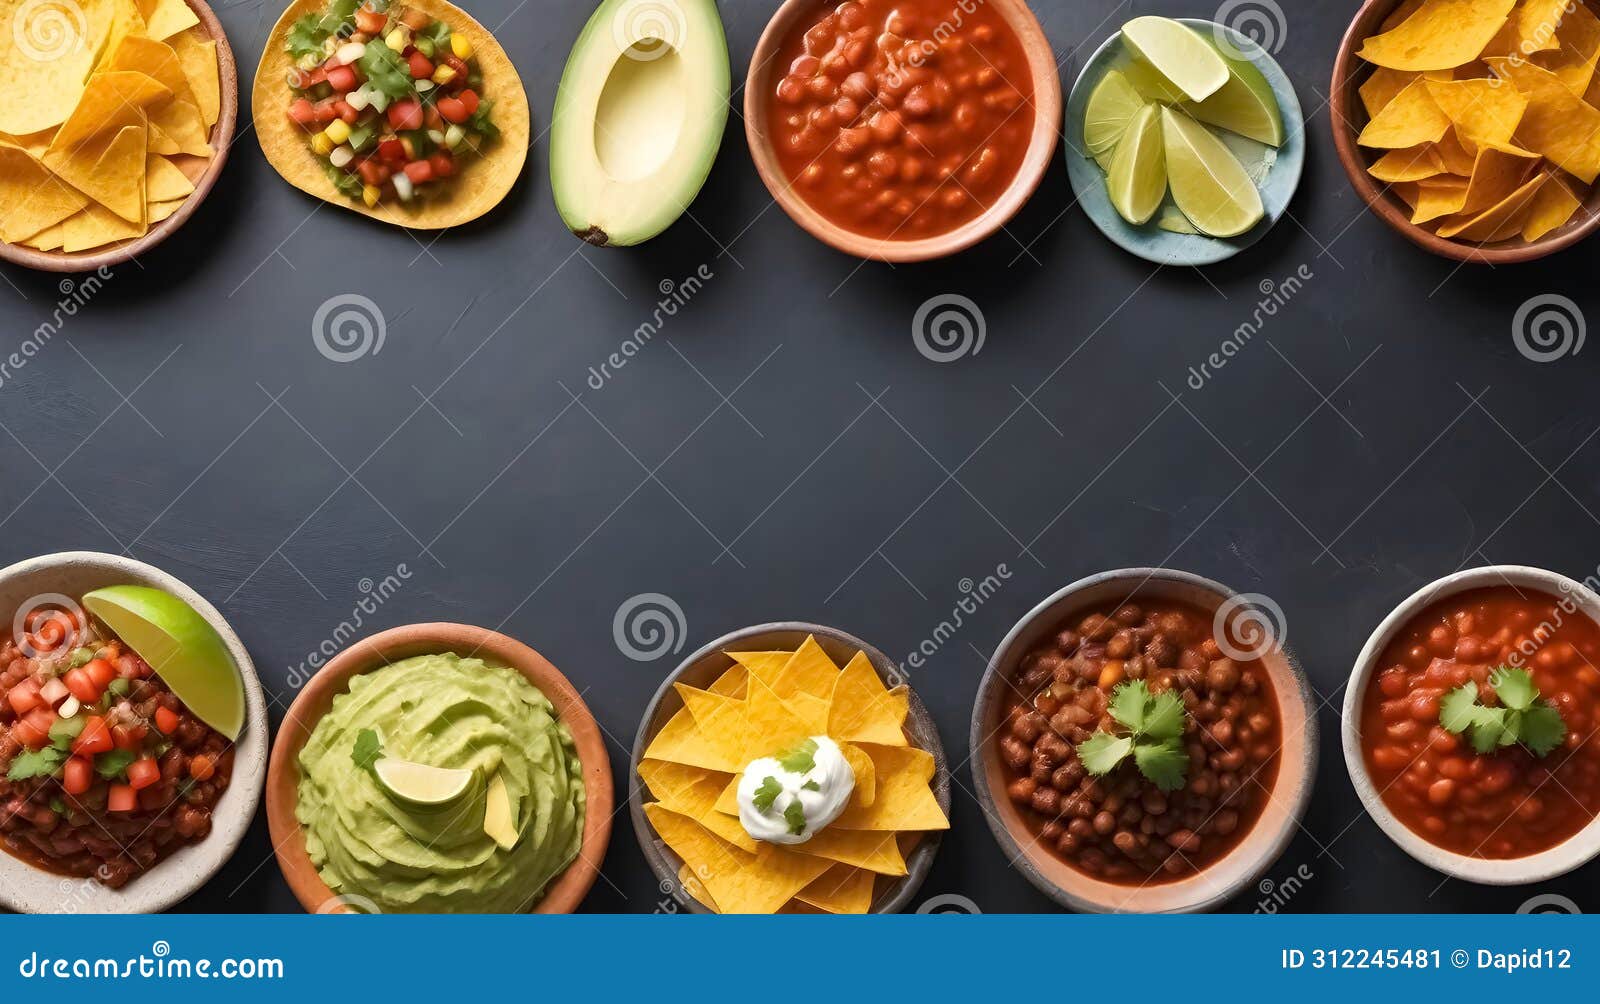 various types of mexican food in bowls